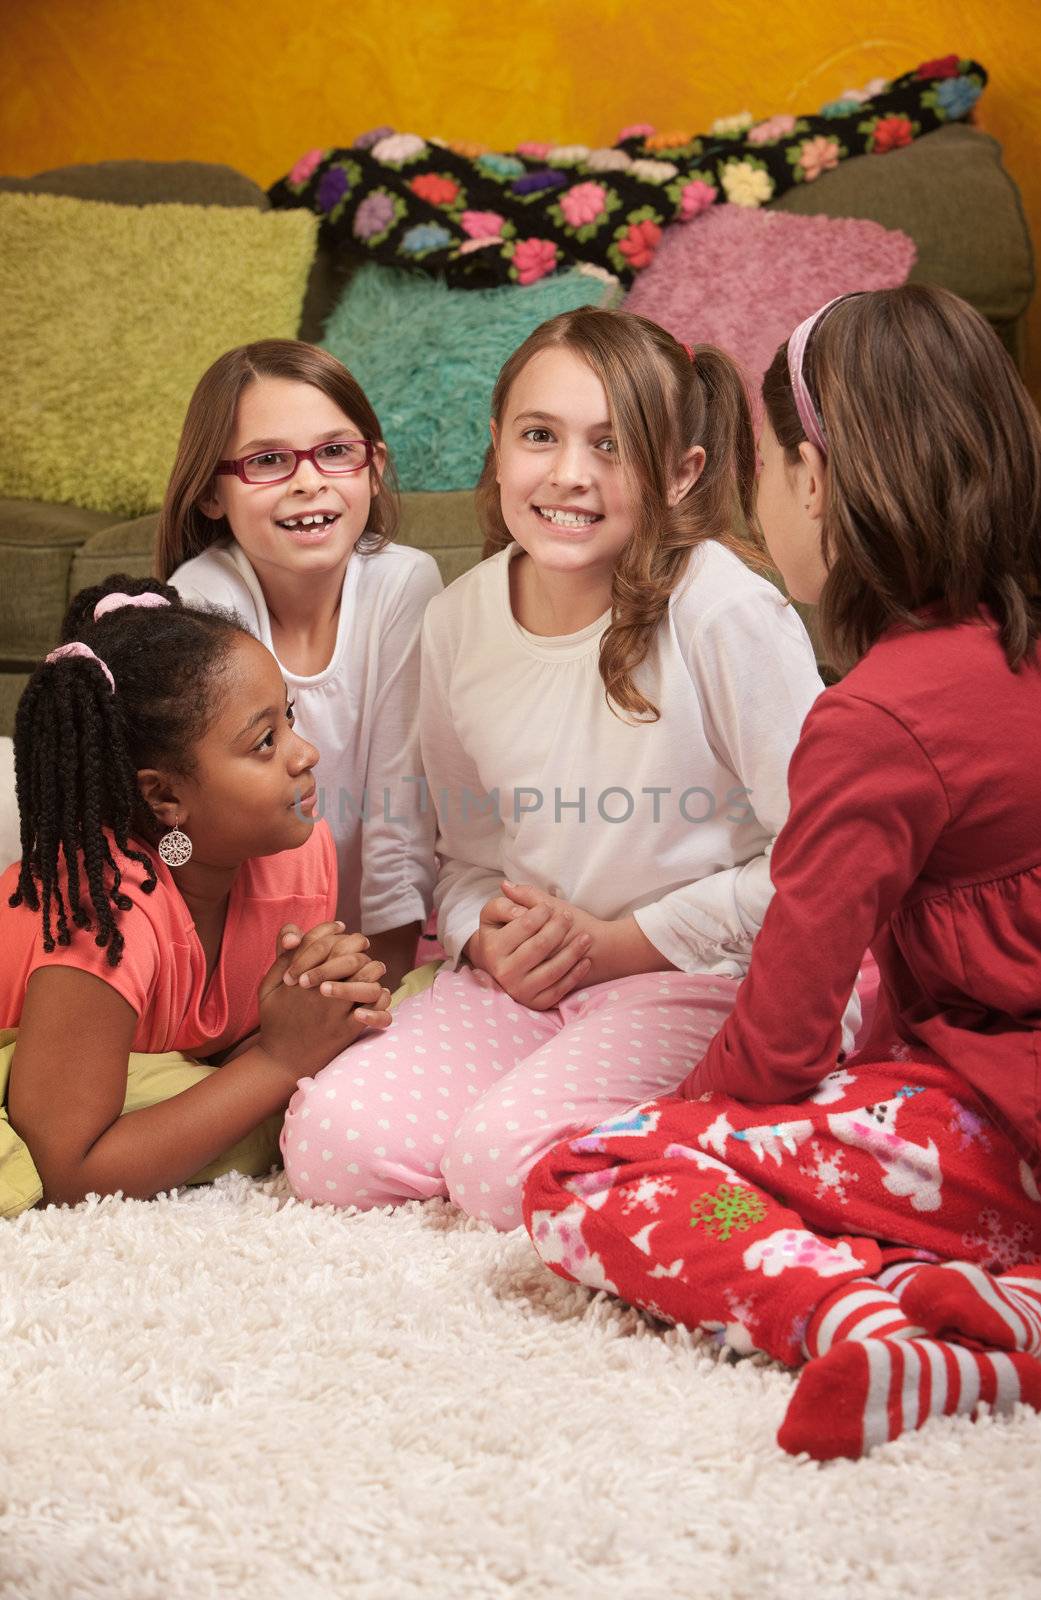 Little girl wrings hands with friends at a sleepover